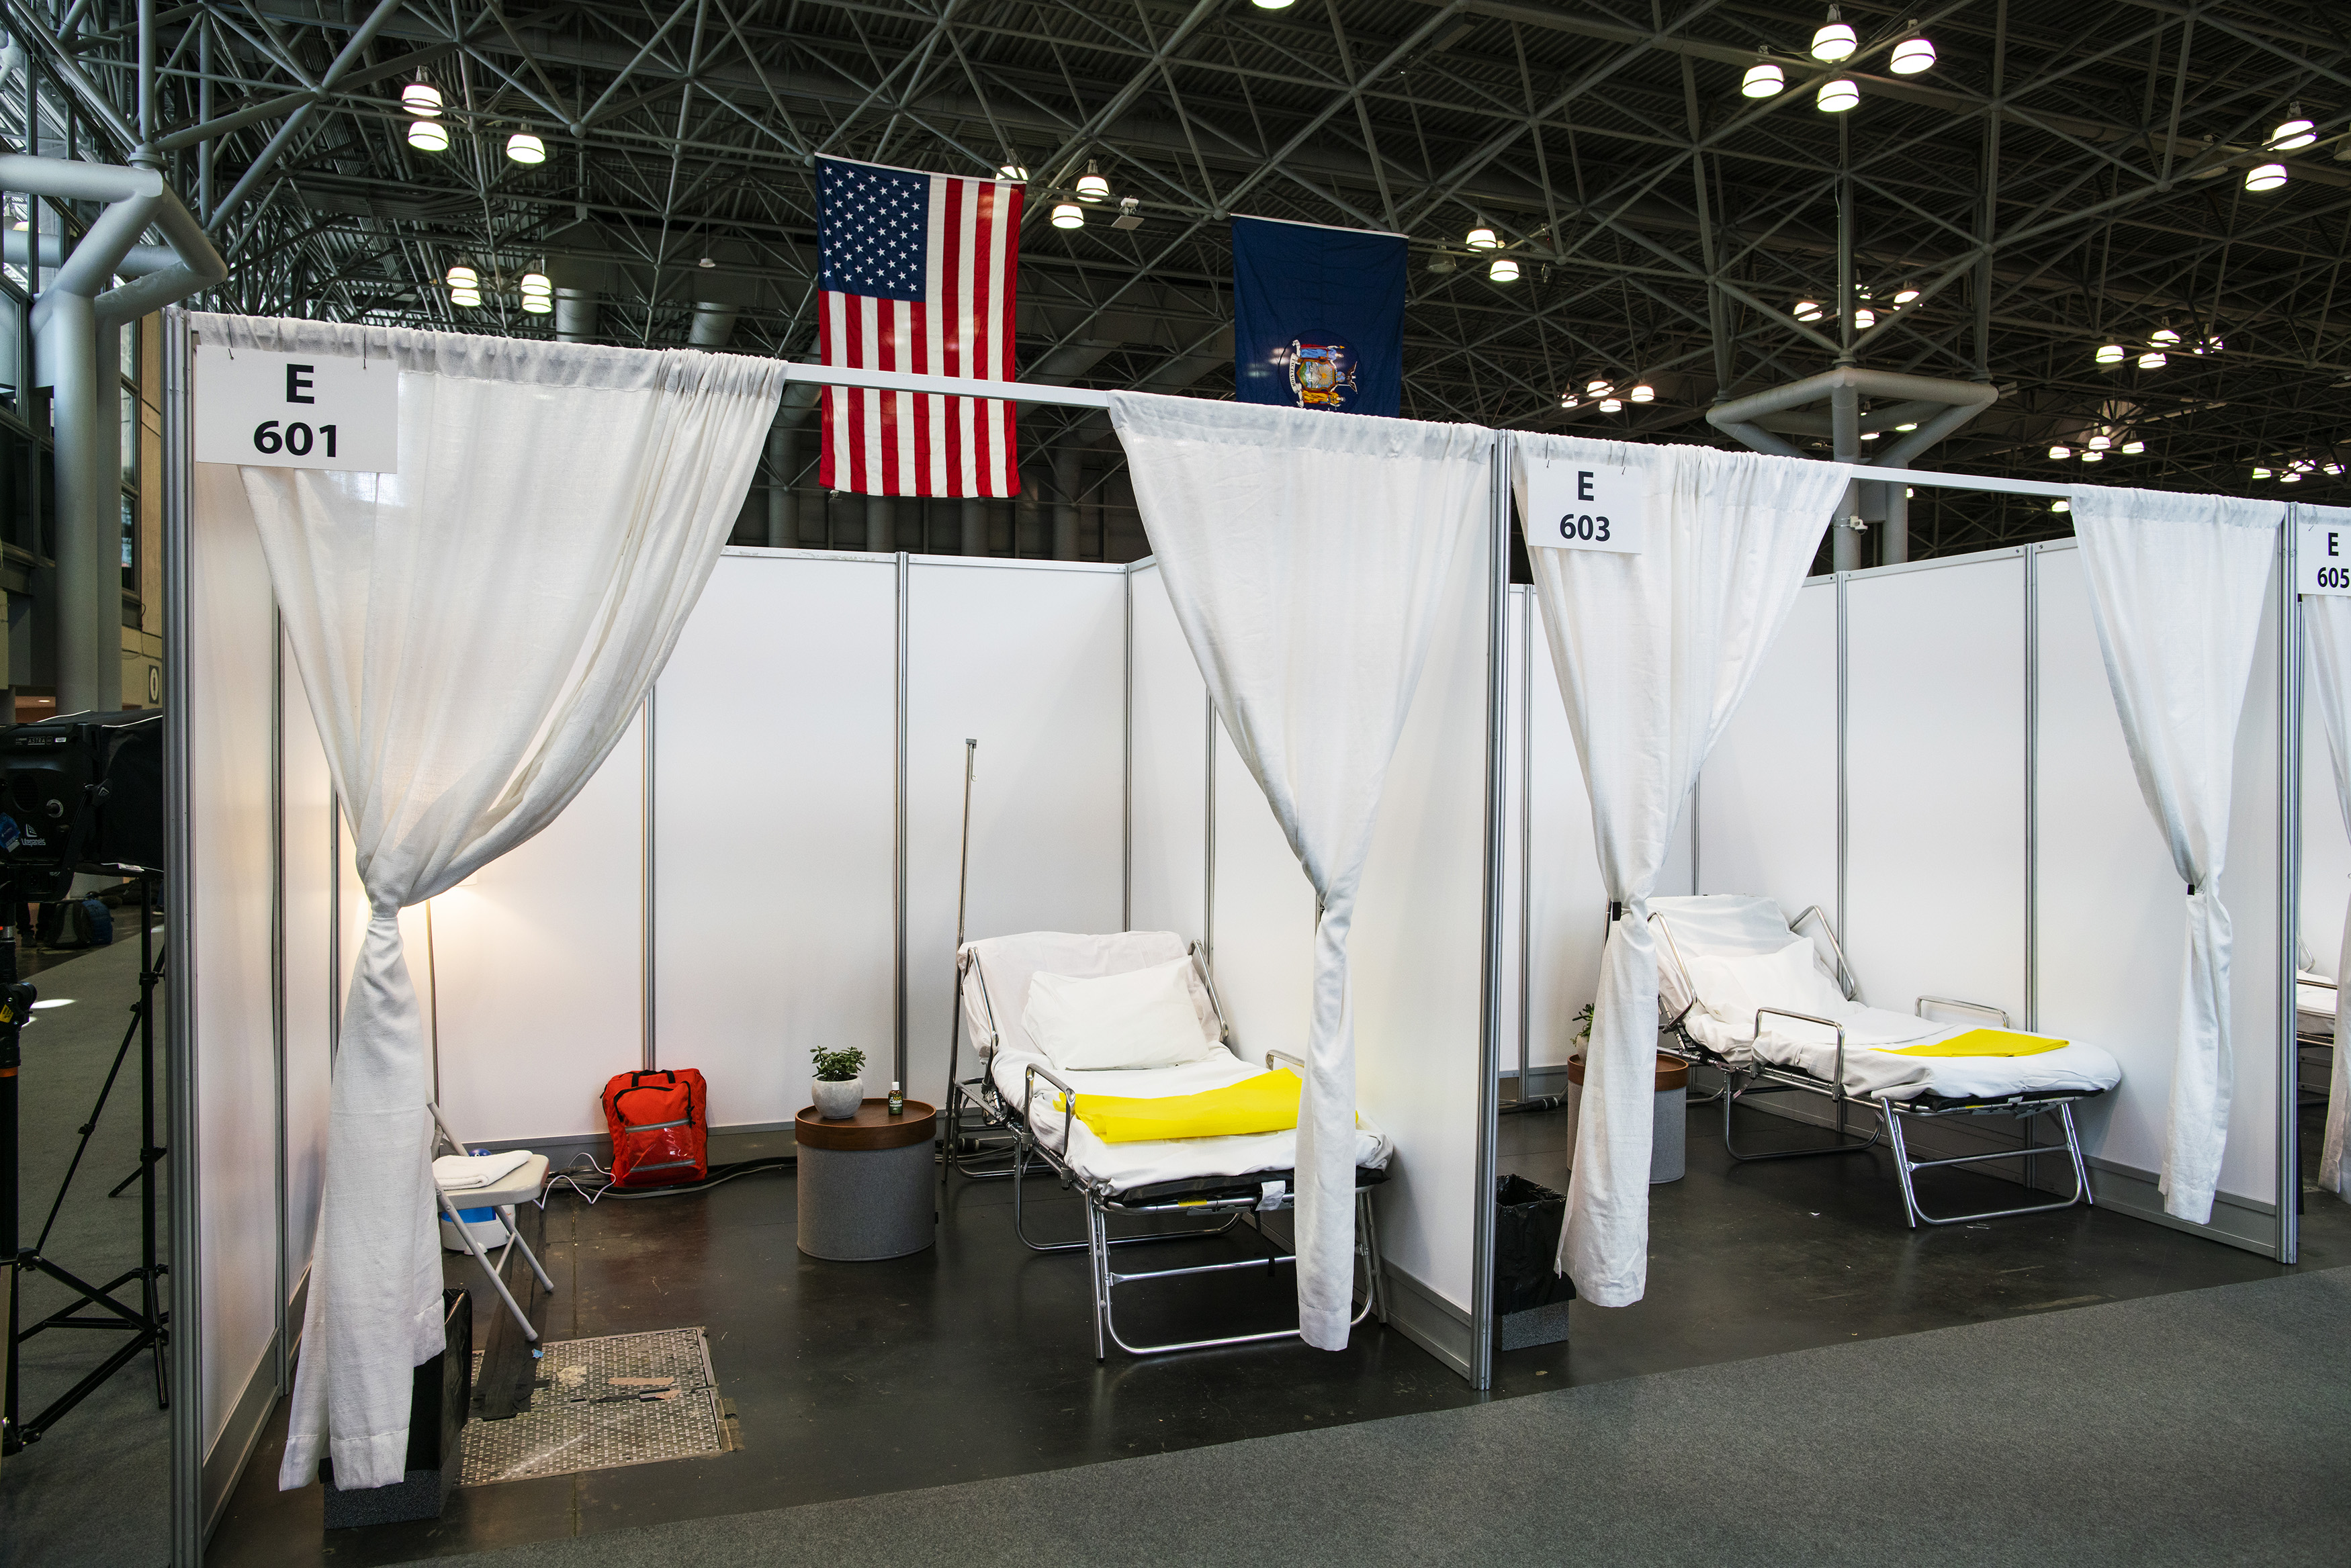 Hospital bed booths are set up at the Jacob K. Javits Convention Center which is being turned into a hospital to help fight coronavirus cases on March 27, 2020 in New York City. (Photo by Eduardo Munoz Alvarez/Getty Images)